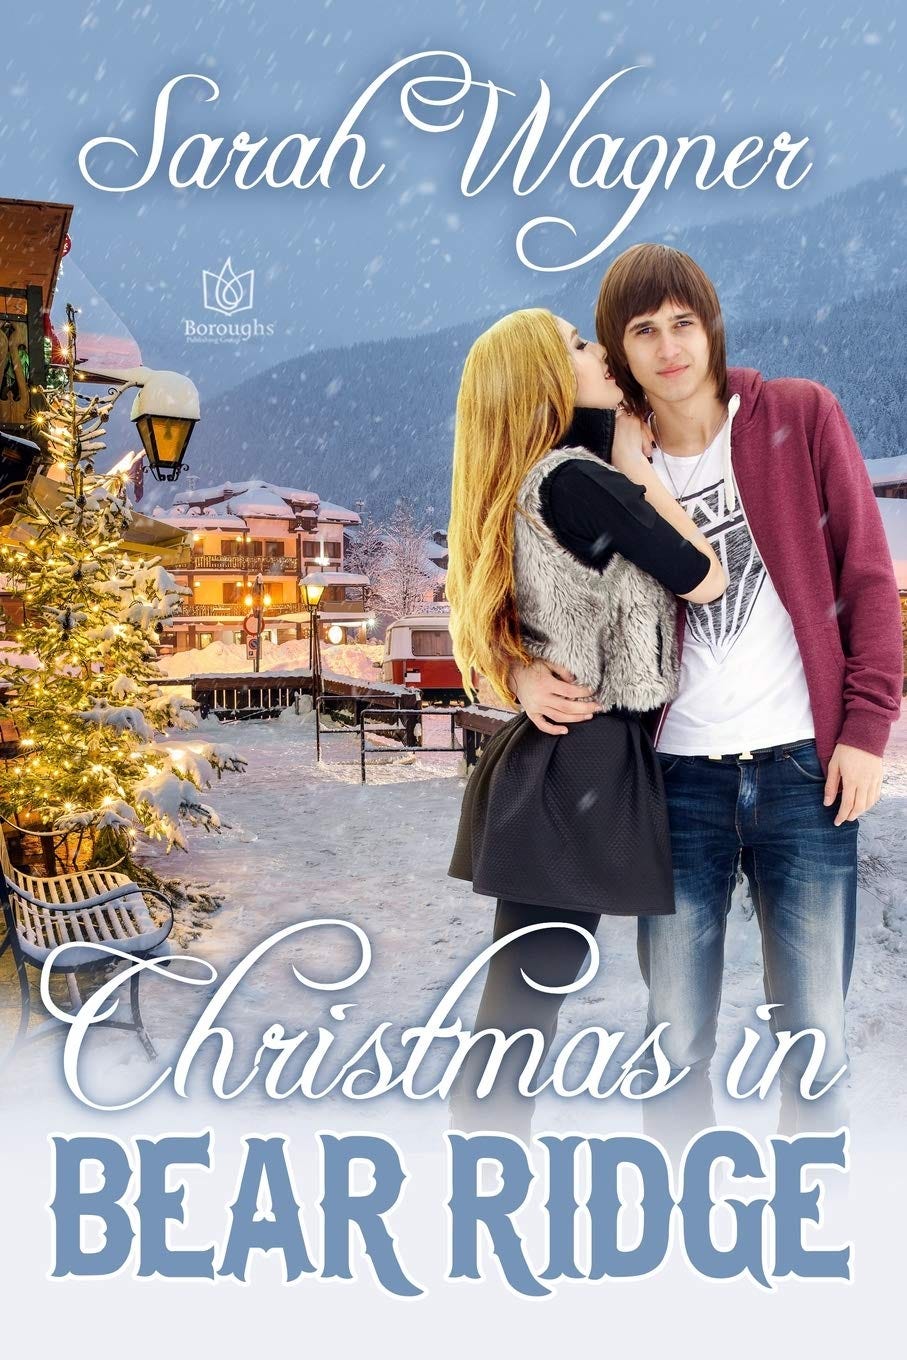 cover image for Christmas in Bear Ridge by Sarah Wagner. A pretty small town decorated for christmas with a light snow falling. An International Harvester camper in the background. A young blond woman in a black skirt, leggings, and top with a white vest leans in to kiss a young man on the cheek. He is wearing jeans, a white graphic tshirt and a red hoodie. 